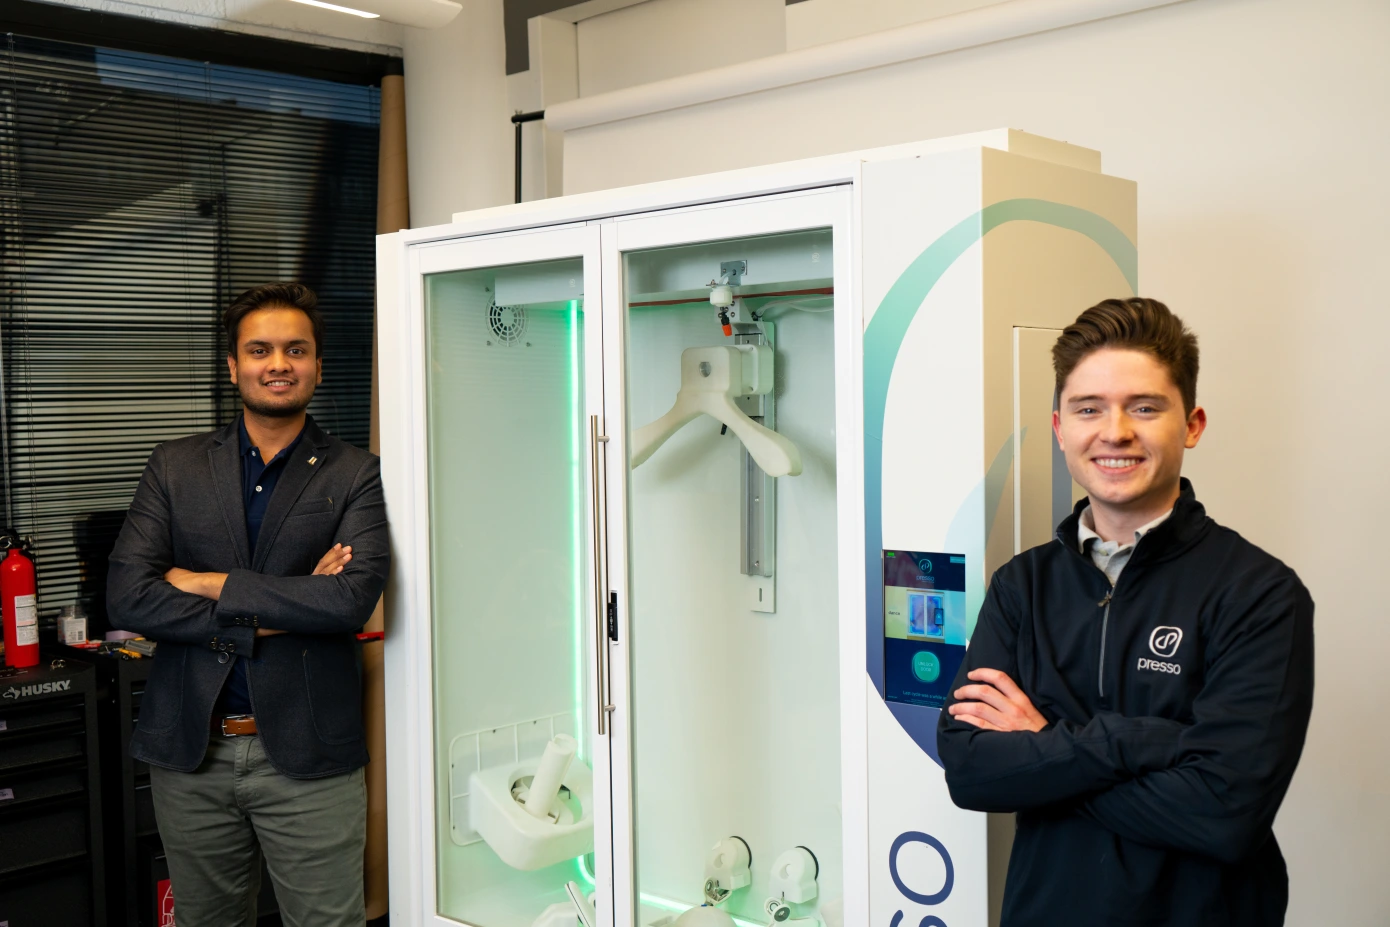 Dry-cleaning robotics startup Presso raises $1.6M as it shifts focus to Hollywood